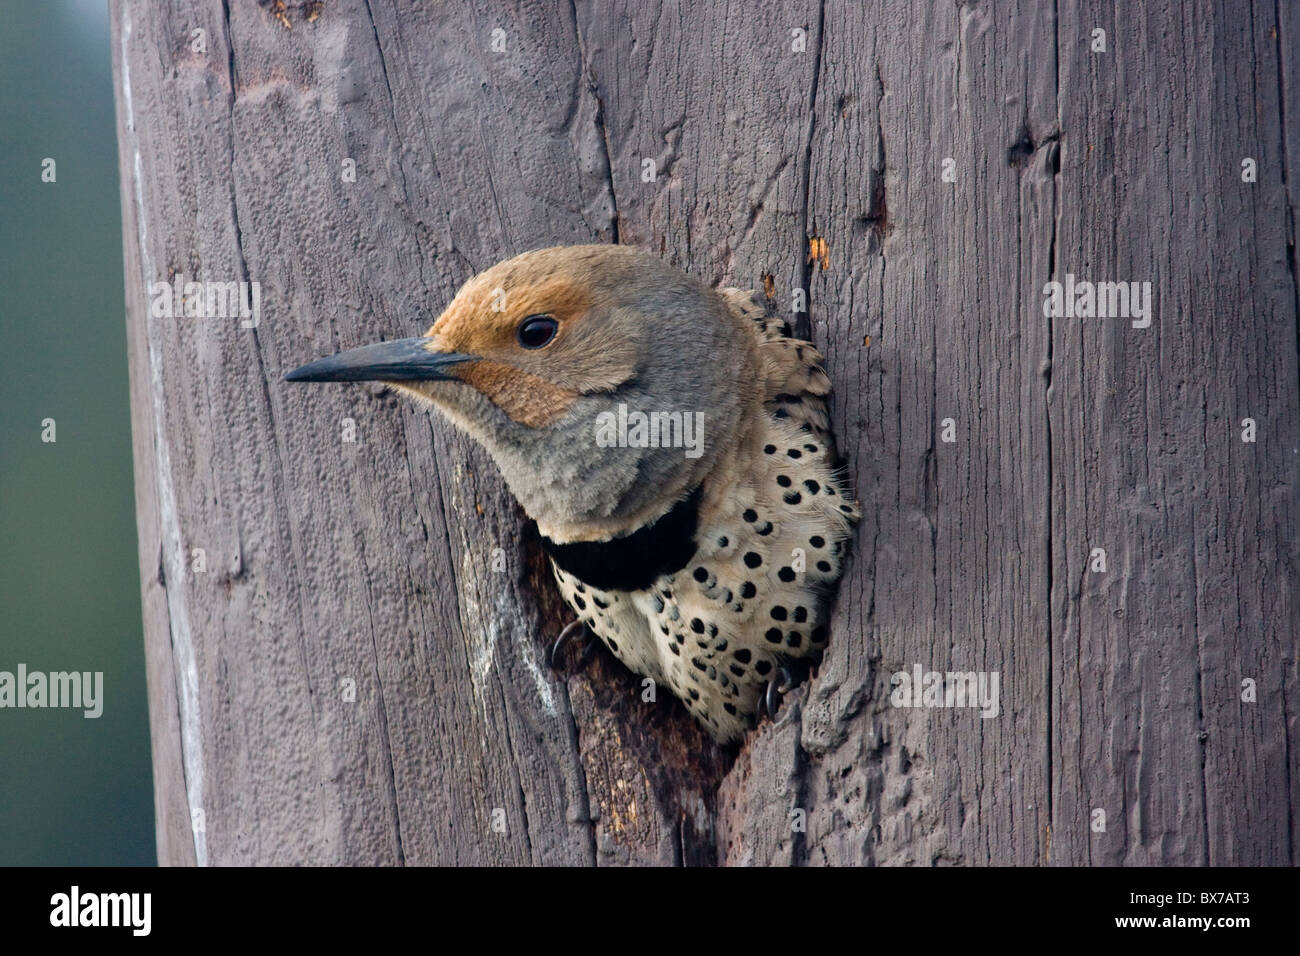 Northern Flicker by Nesting Hole Stock Photo